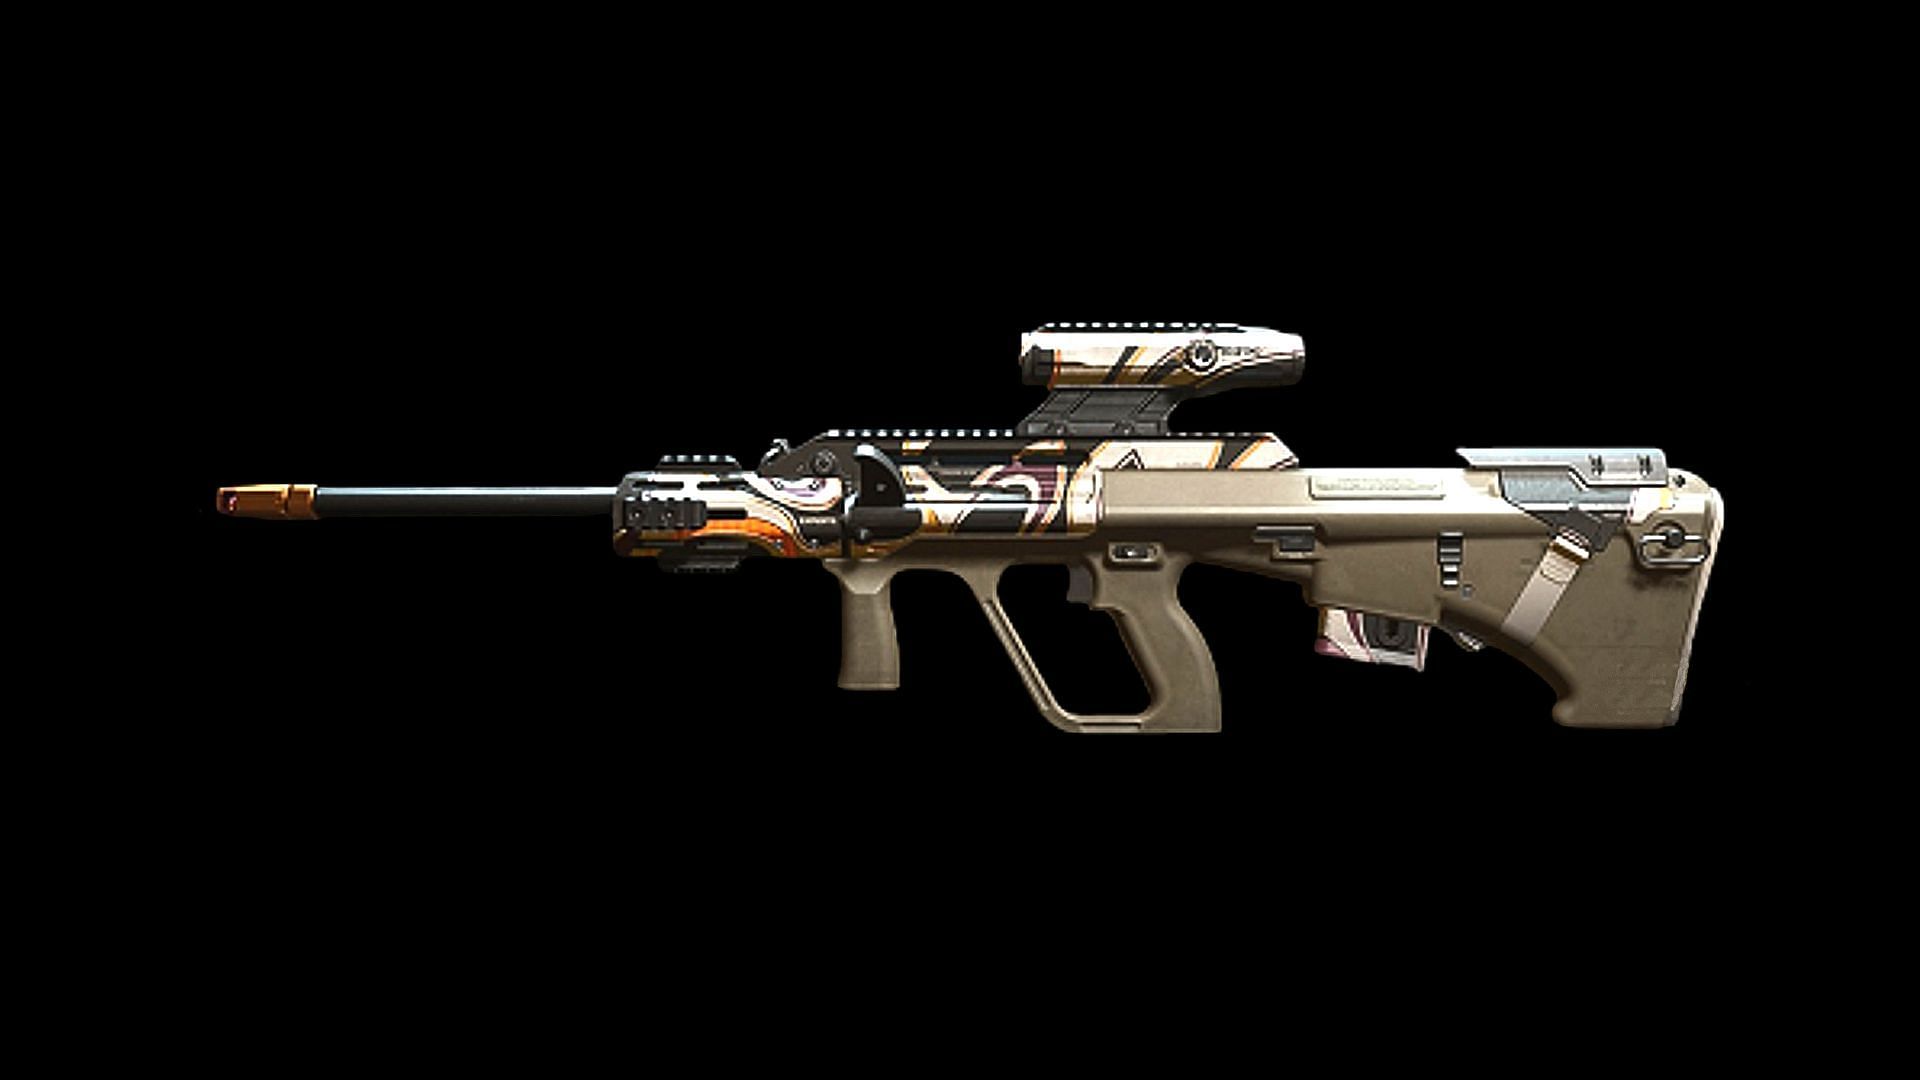 The STB 556 assault rifle in Modern Warfare 2 and Warzone 2.0 (Image via Activision)